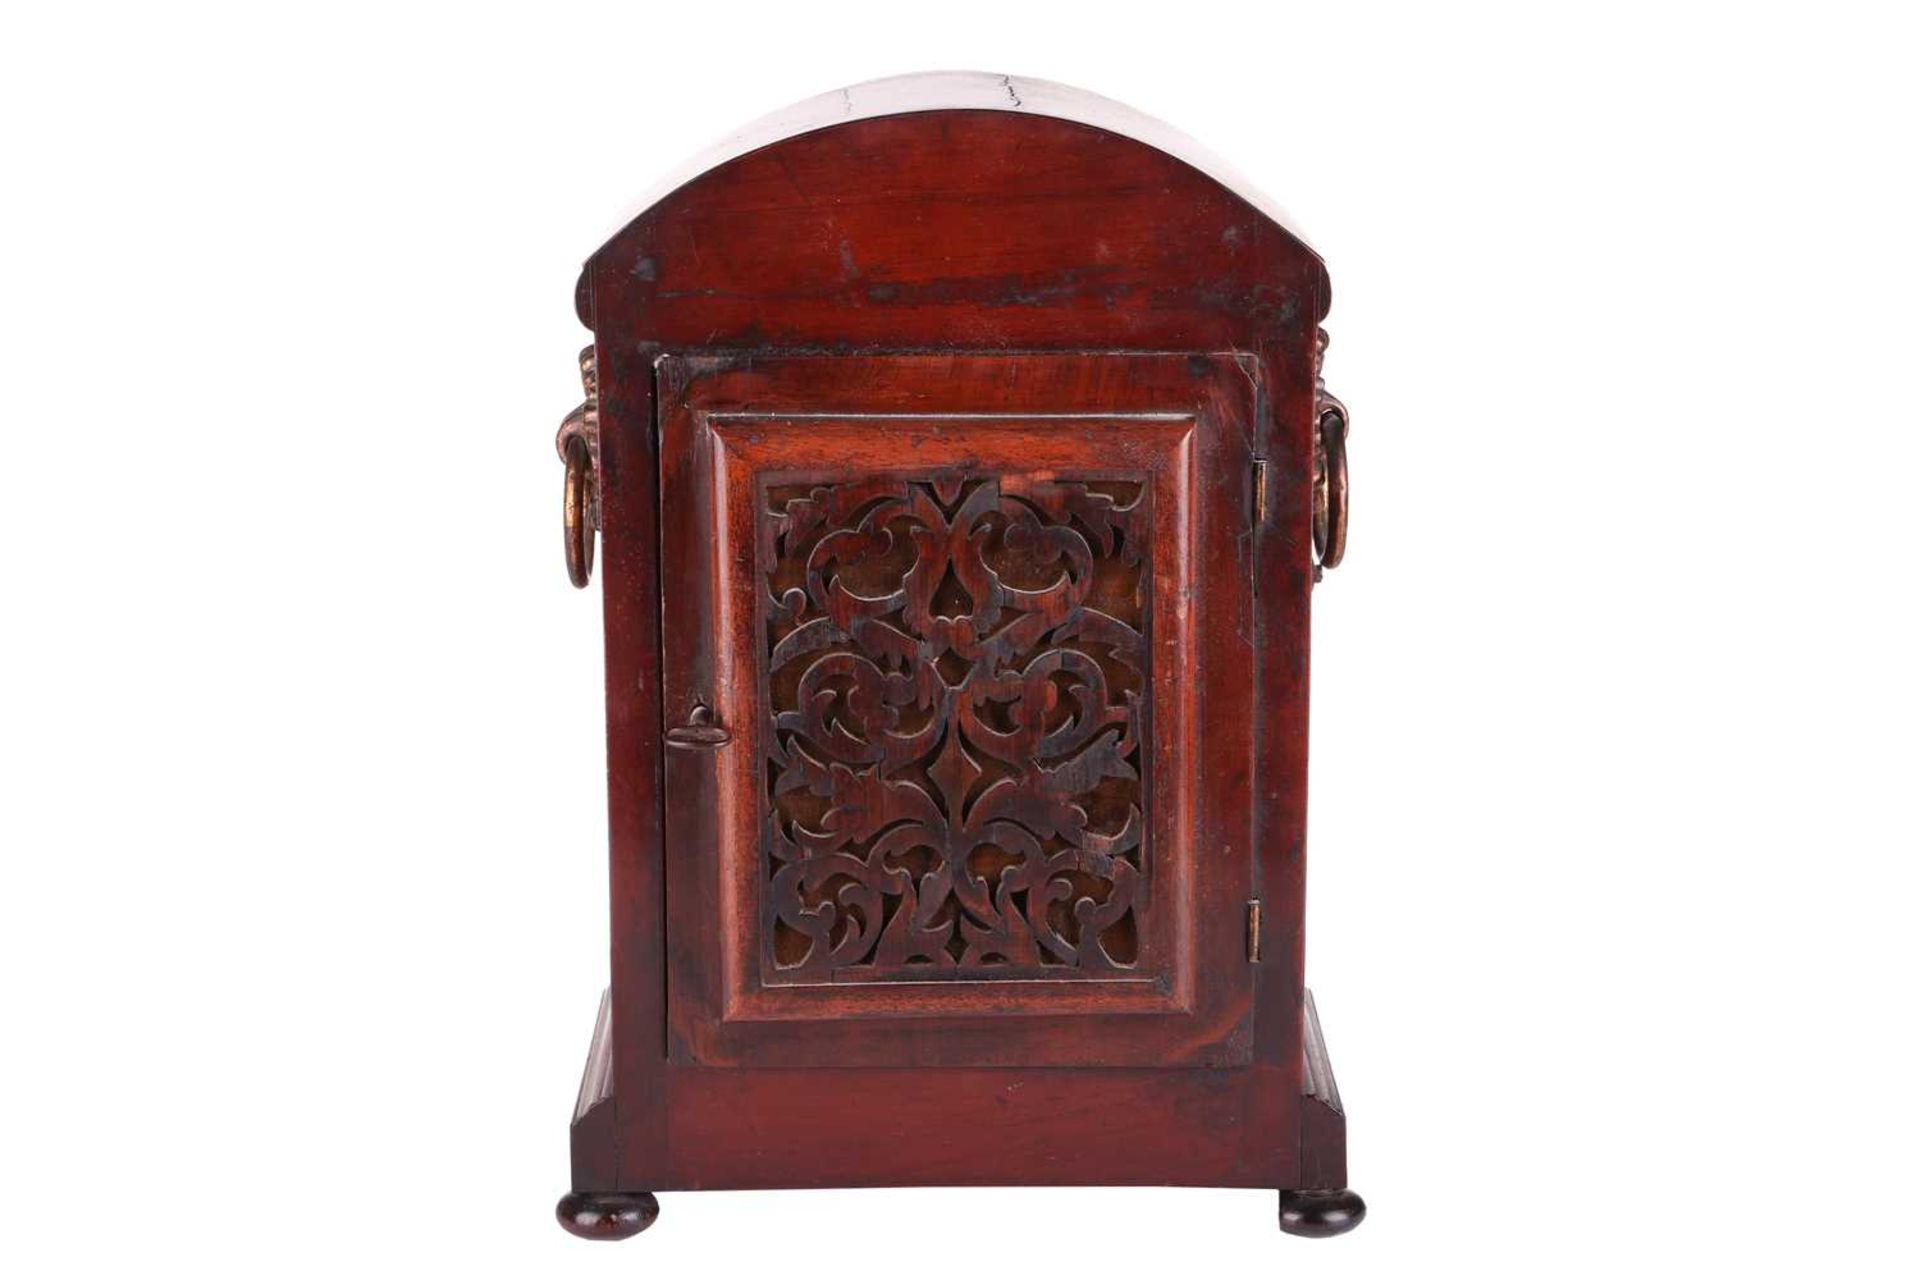 Moore of London a Regency mahogany 8-day twin fusee mantel clock case, with an arched top case and p - Image 4 of 7